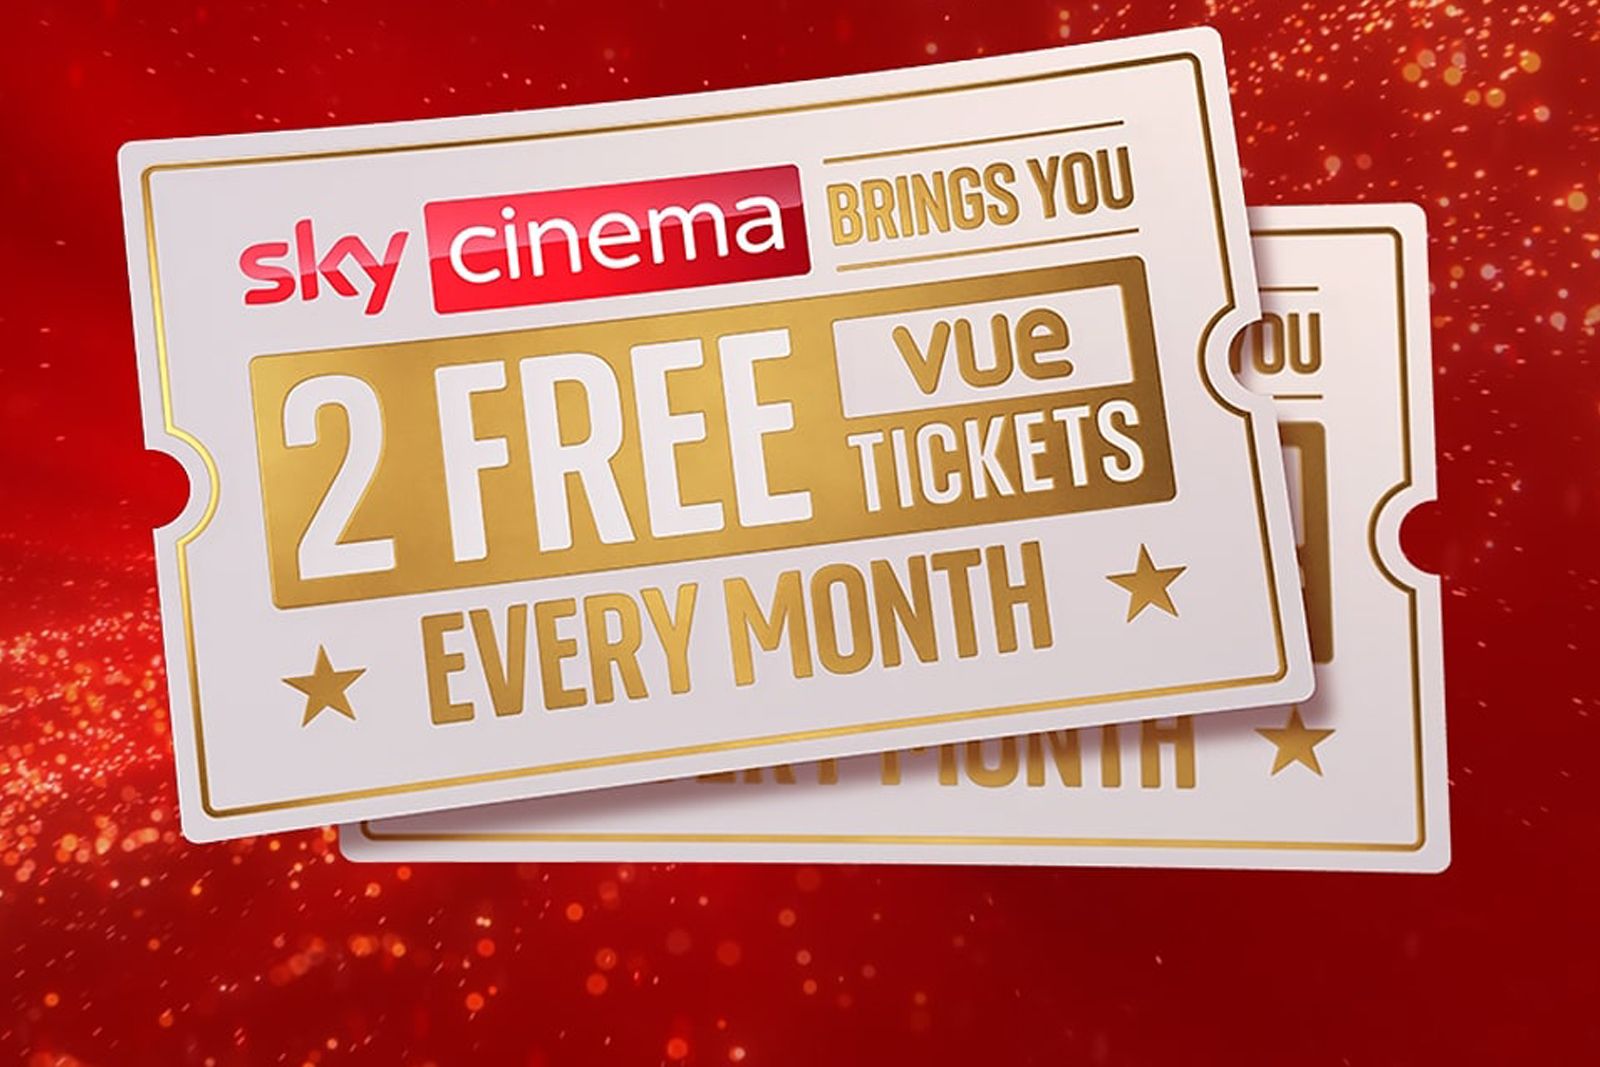 How to get free cinema tickets if you're a Sky Cinema subscriber